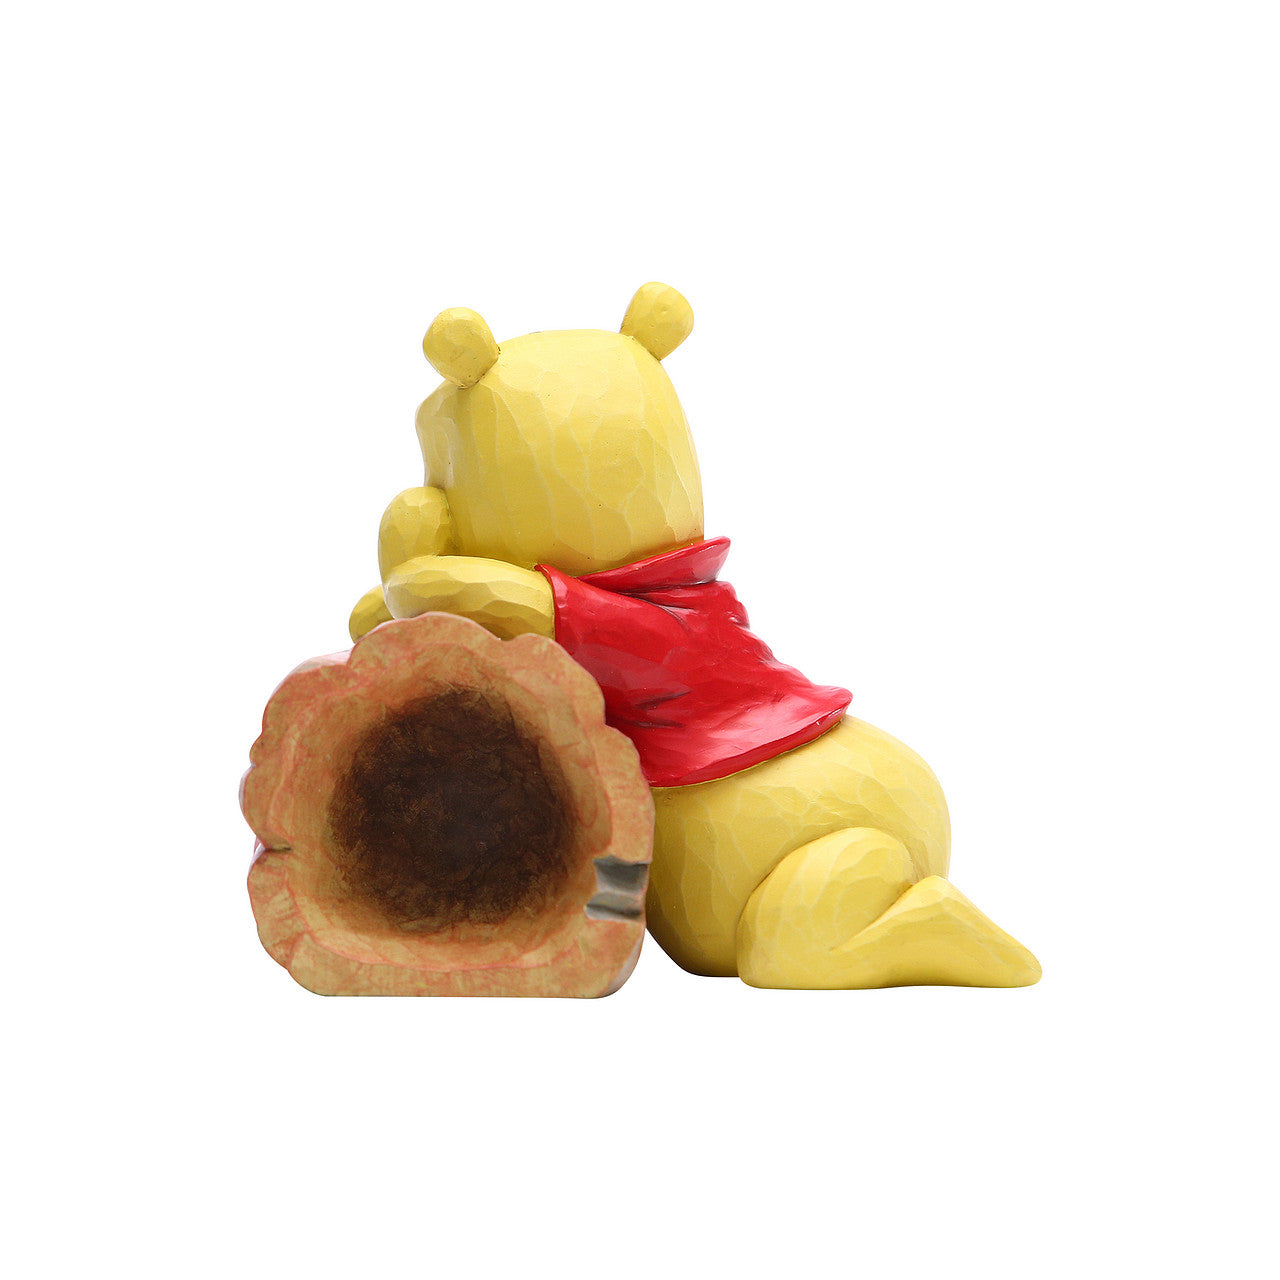 Truncated Conversation - Pooh and Piglet on a Log